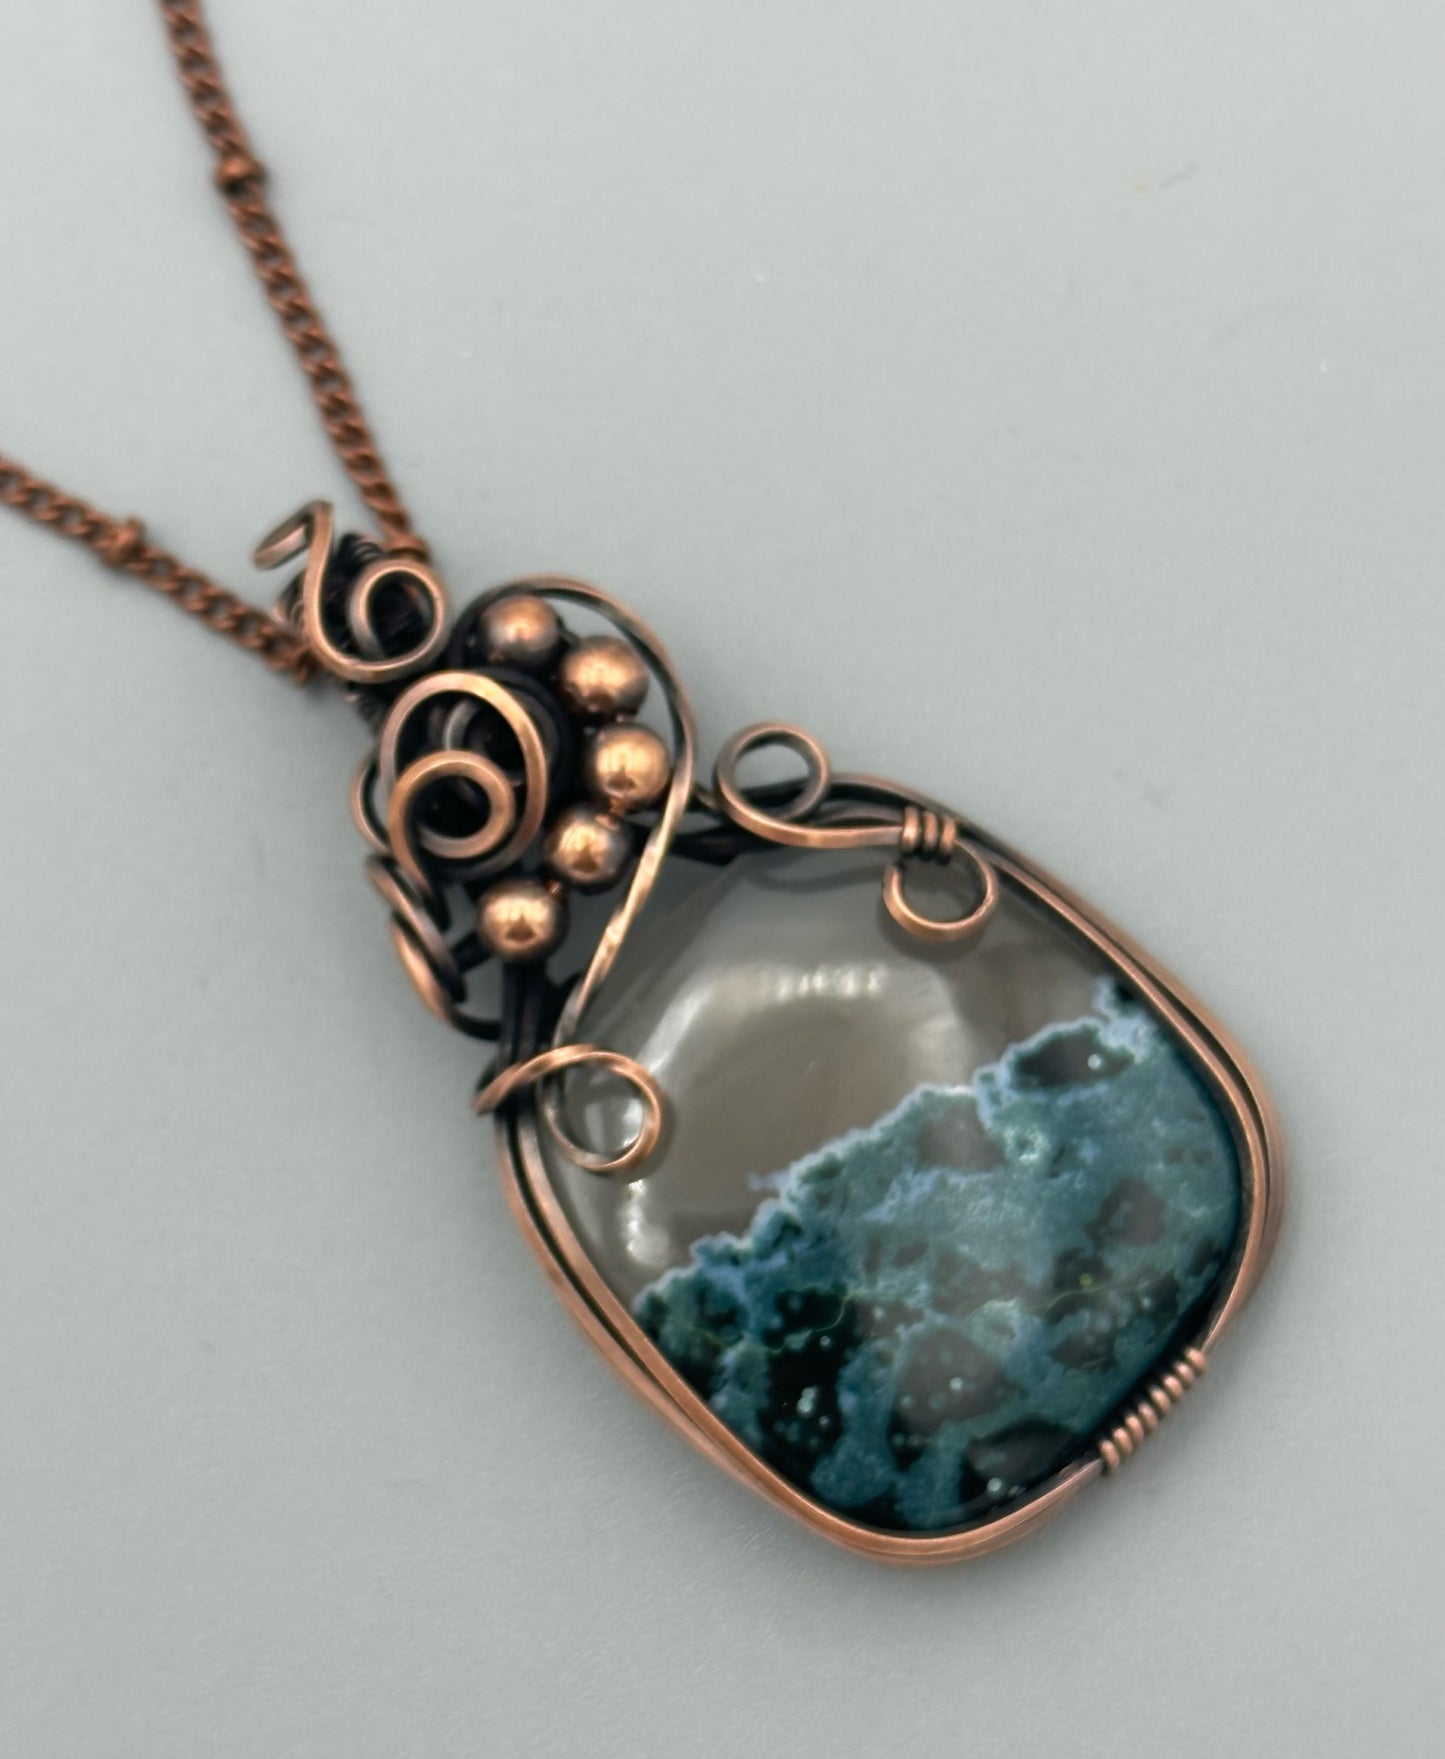 Handmade Wire Wrapped Rounded Square Stone With Copper Beads